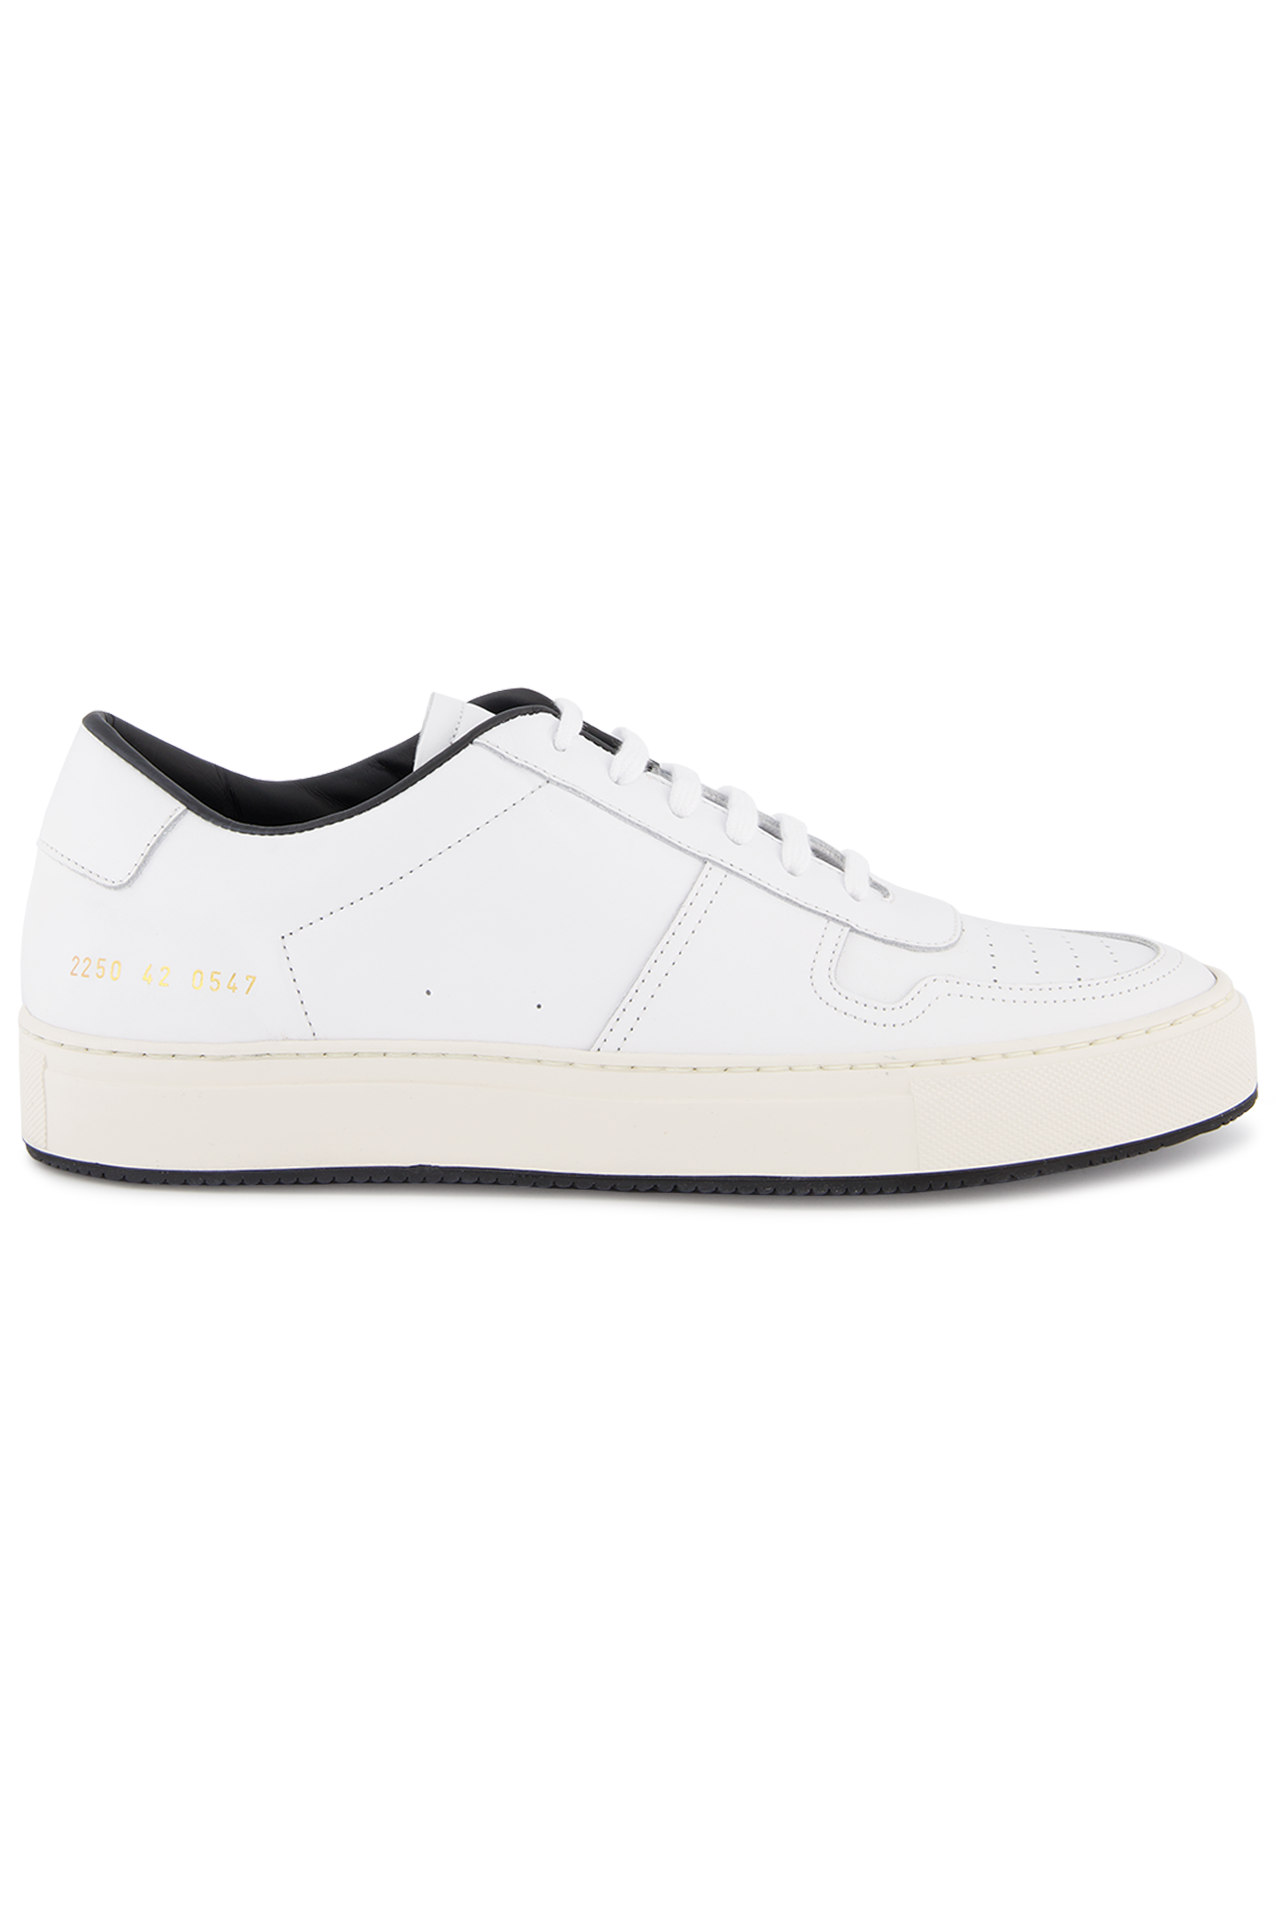 common projects white black